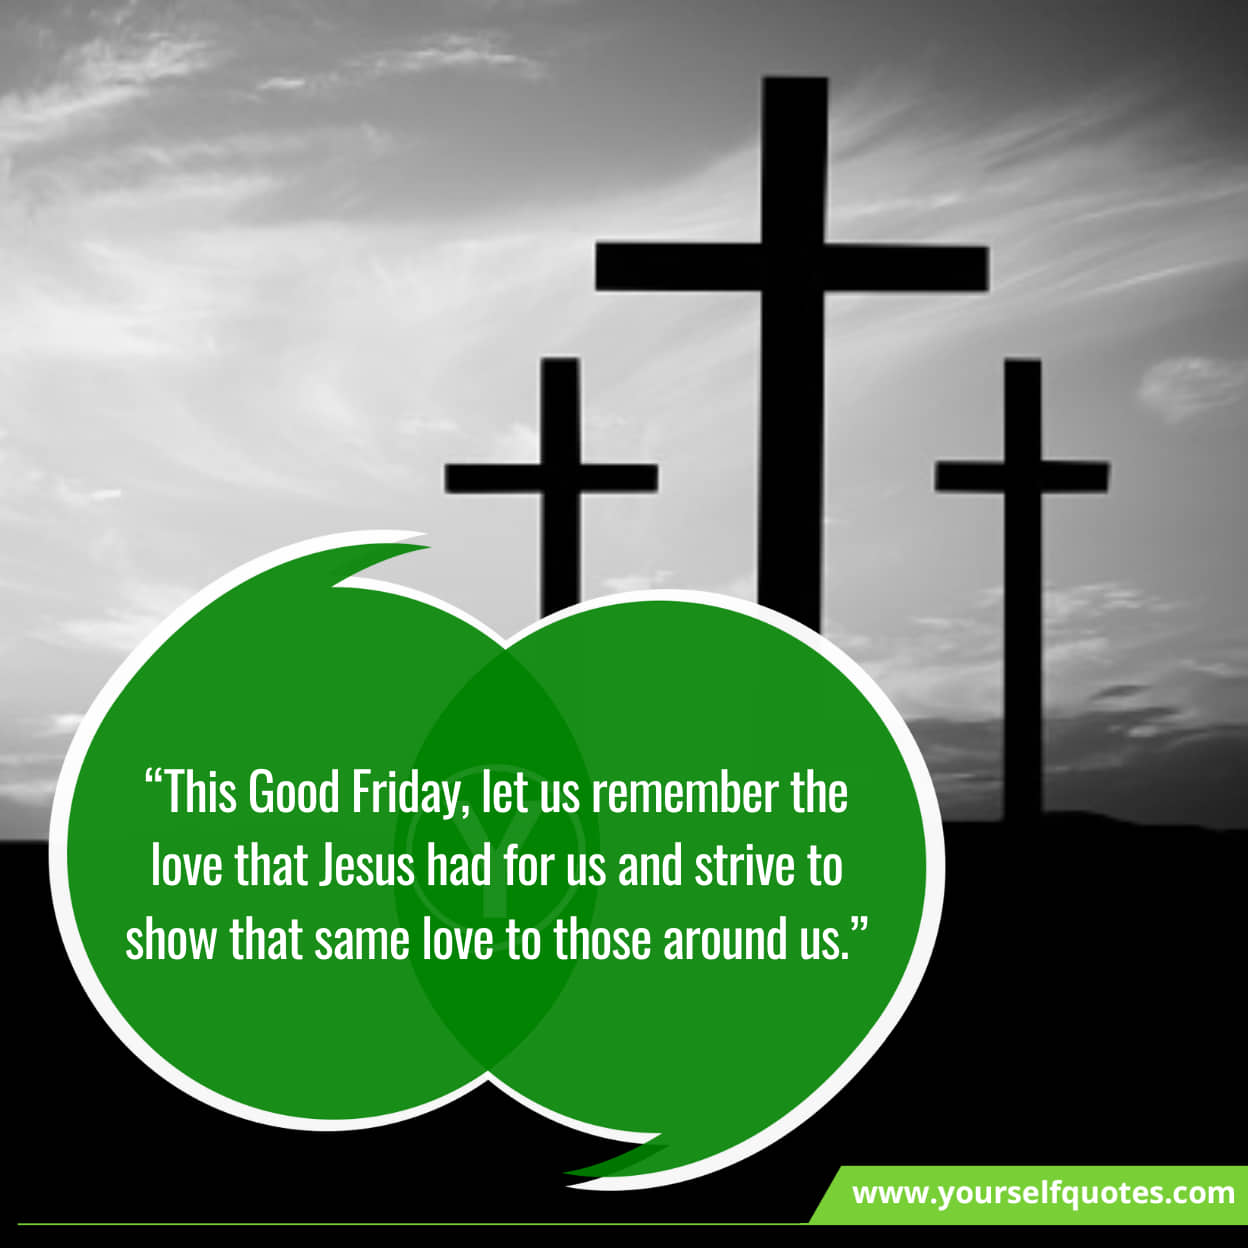 Love and Blessings on Good Friday